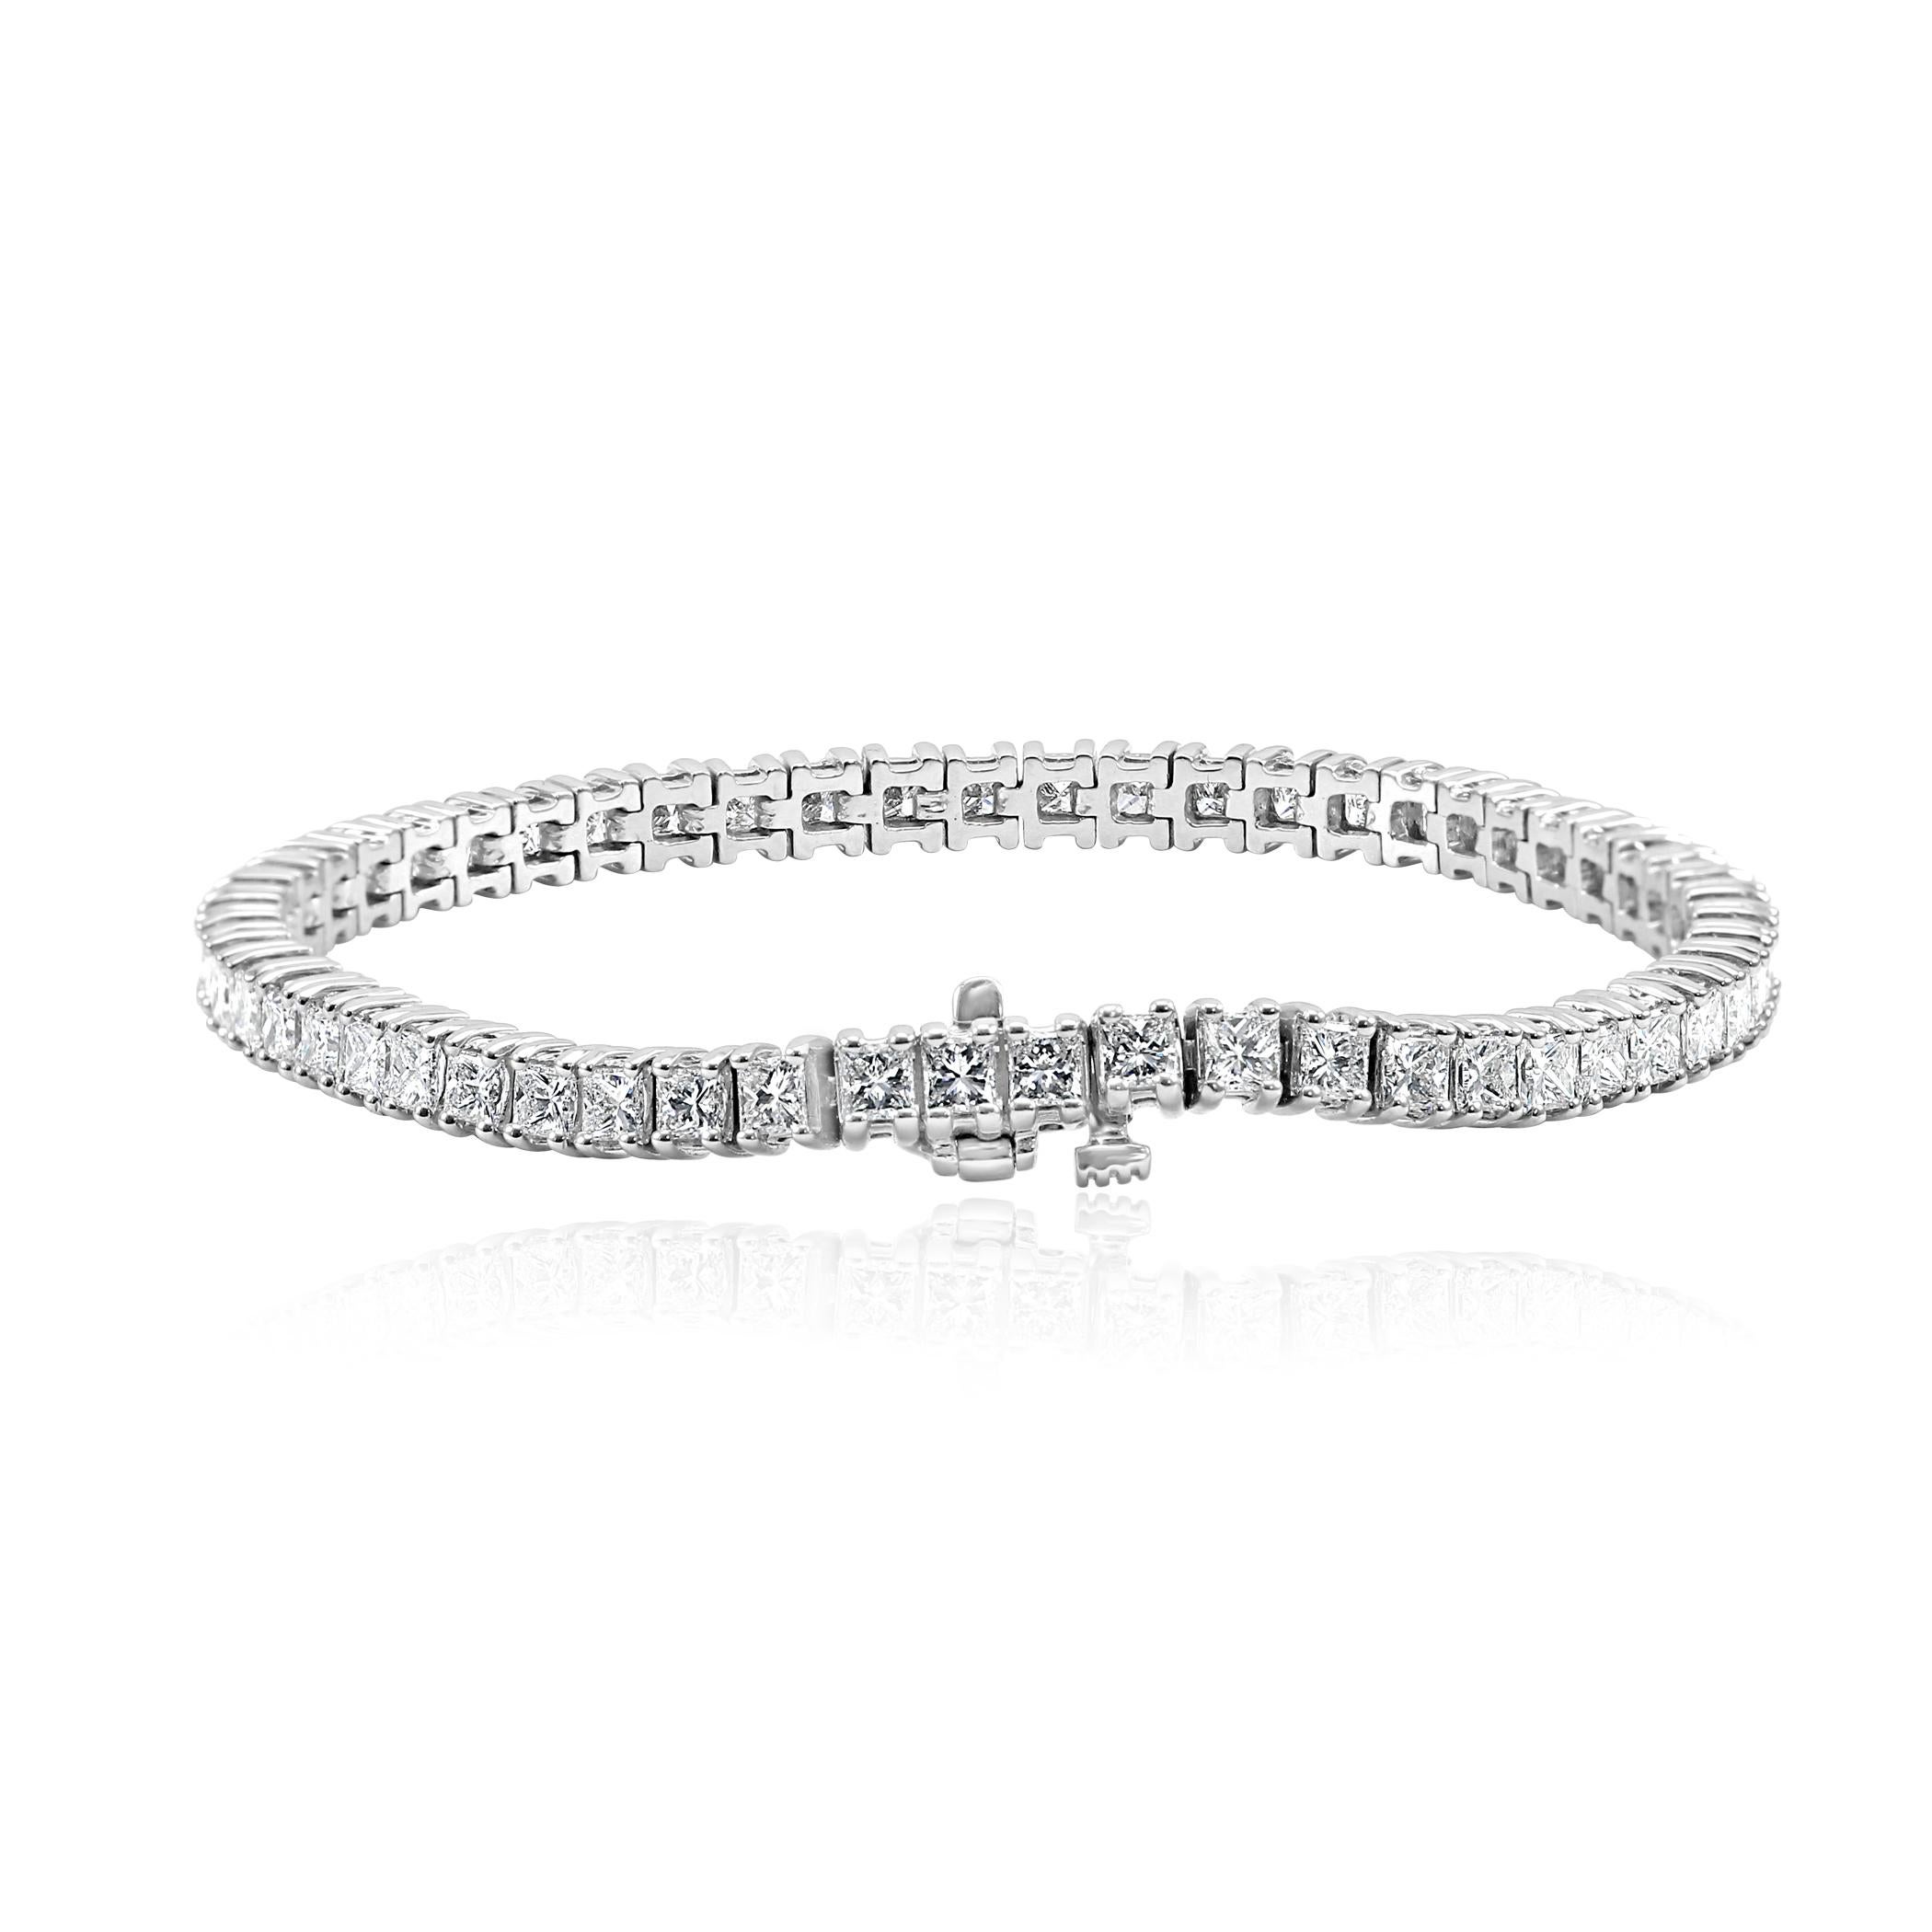 Gorgeous White 56 G-H Color VS-SI clarity Princess Cut 6.90 Carat Total Weight Set in 14K White Gold Straight line always in style Tennis Bracelet. Perfect for all occasions and everyday wear.

MADE IN USA
Style available in different price ranges,